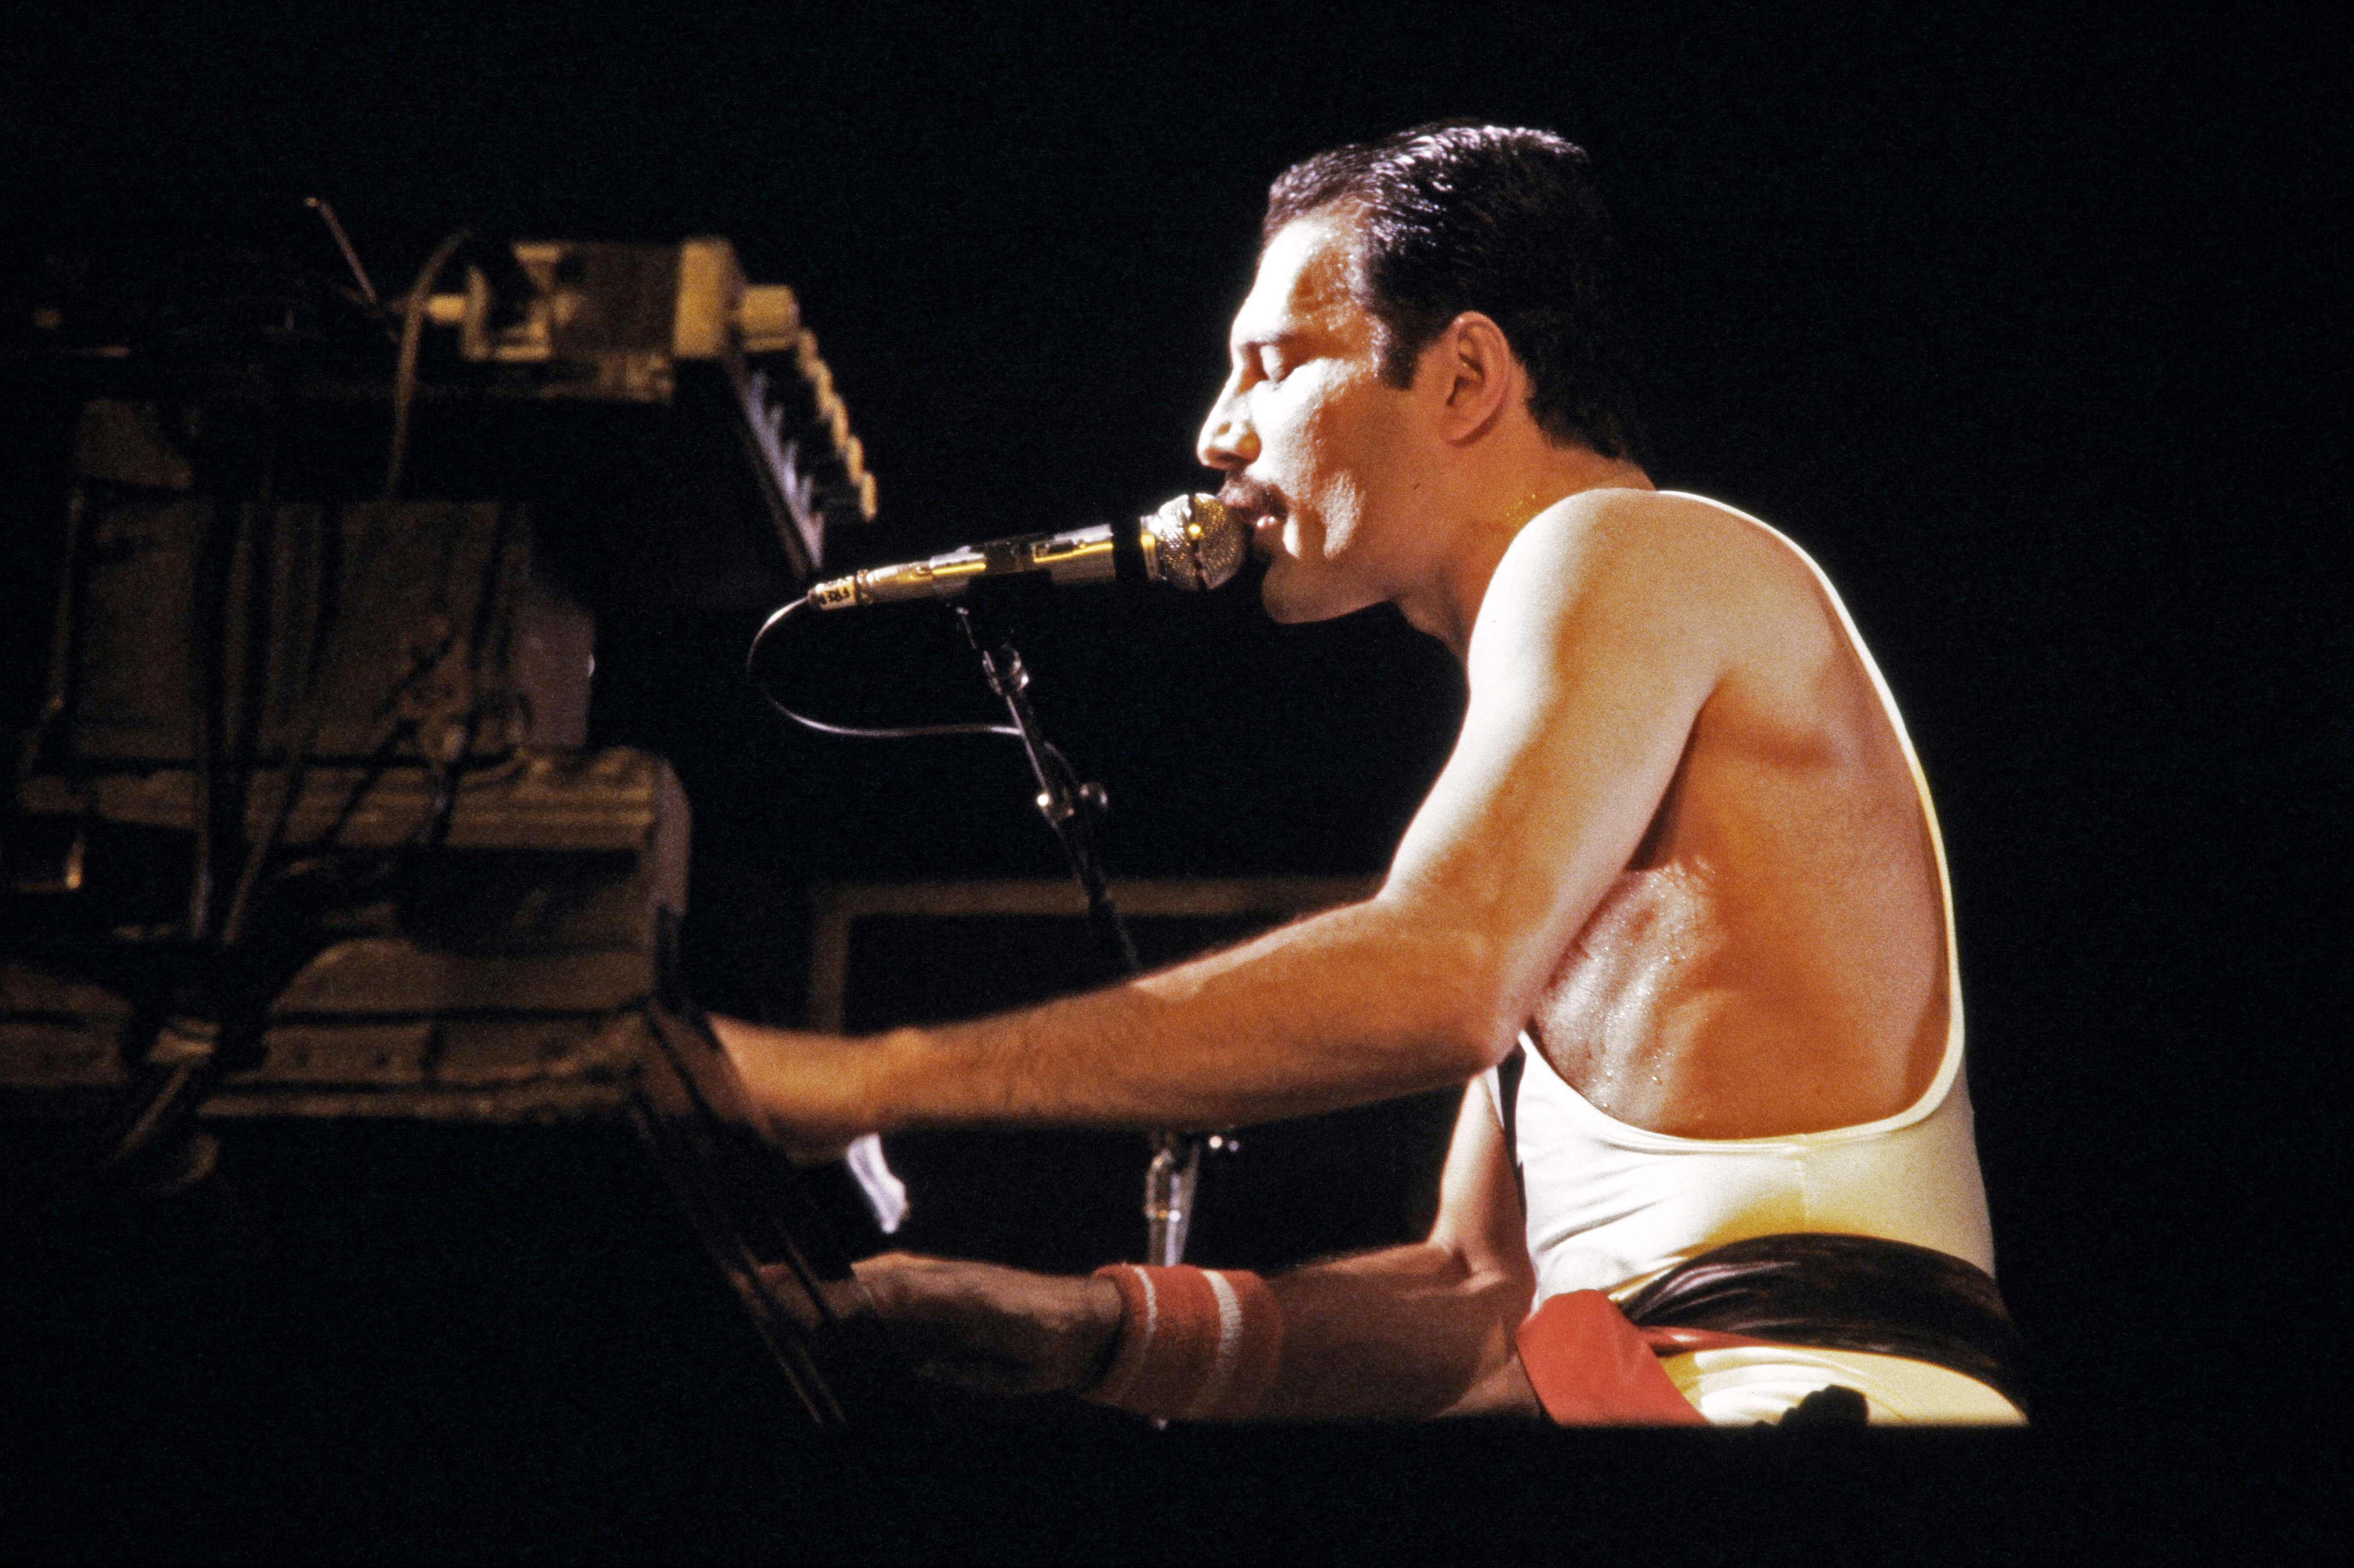 In this file photo taken on September 18, 1984 rock star Freddie Mercury, lead singer of the rock group "Queen", performs during a concert at the Palais Omnisports de Paris Bercy (POPB). (Photo by AFP)